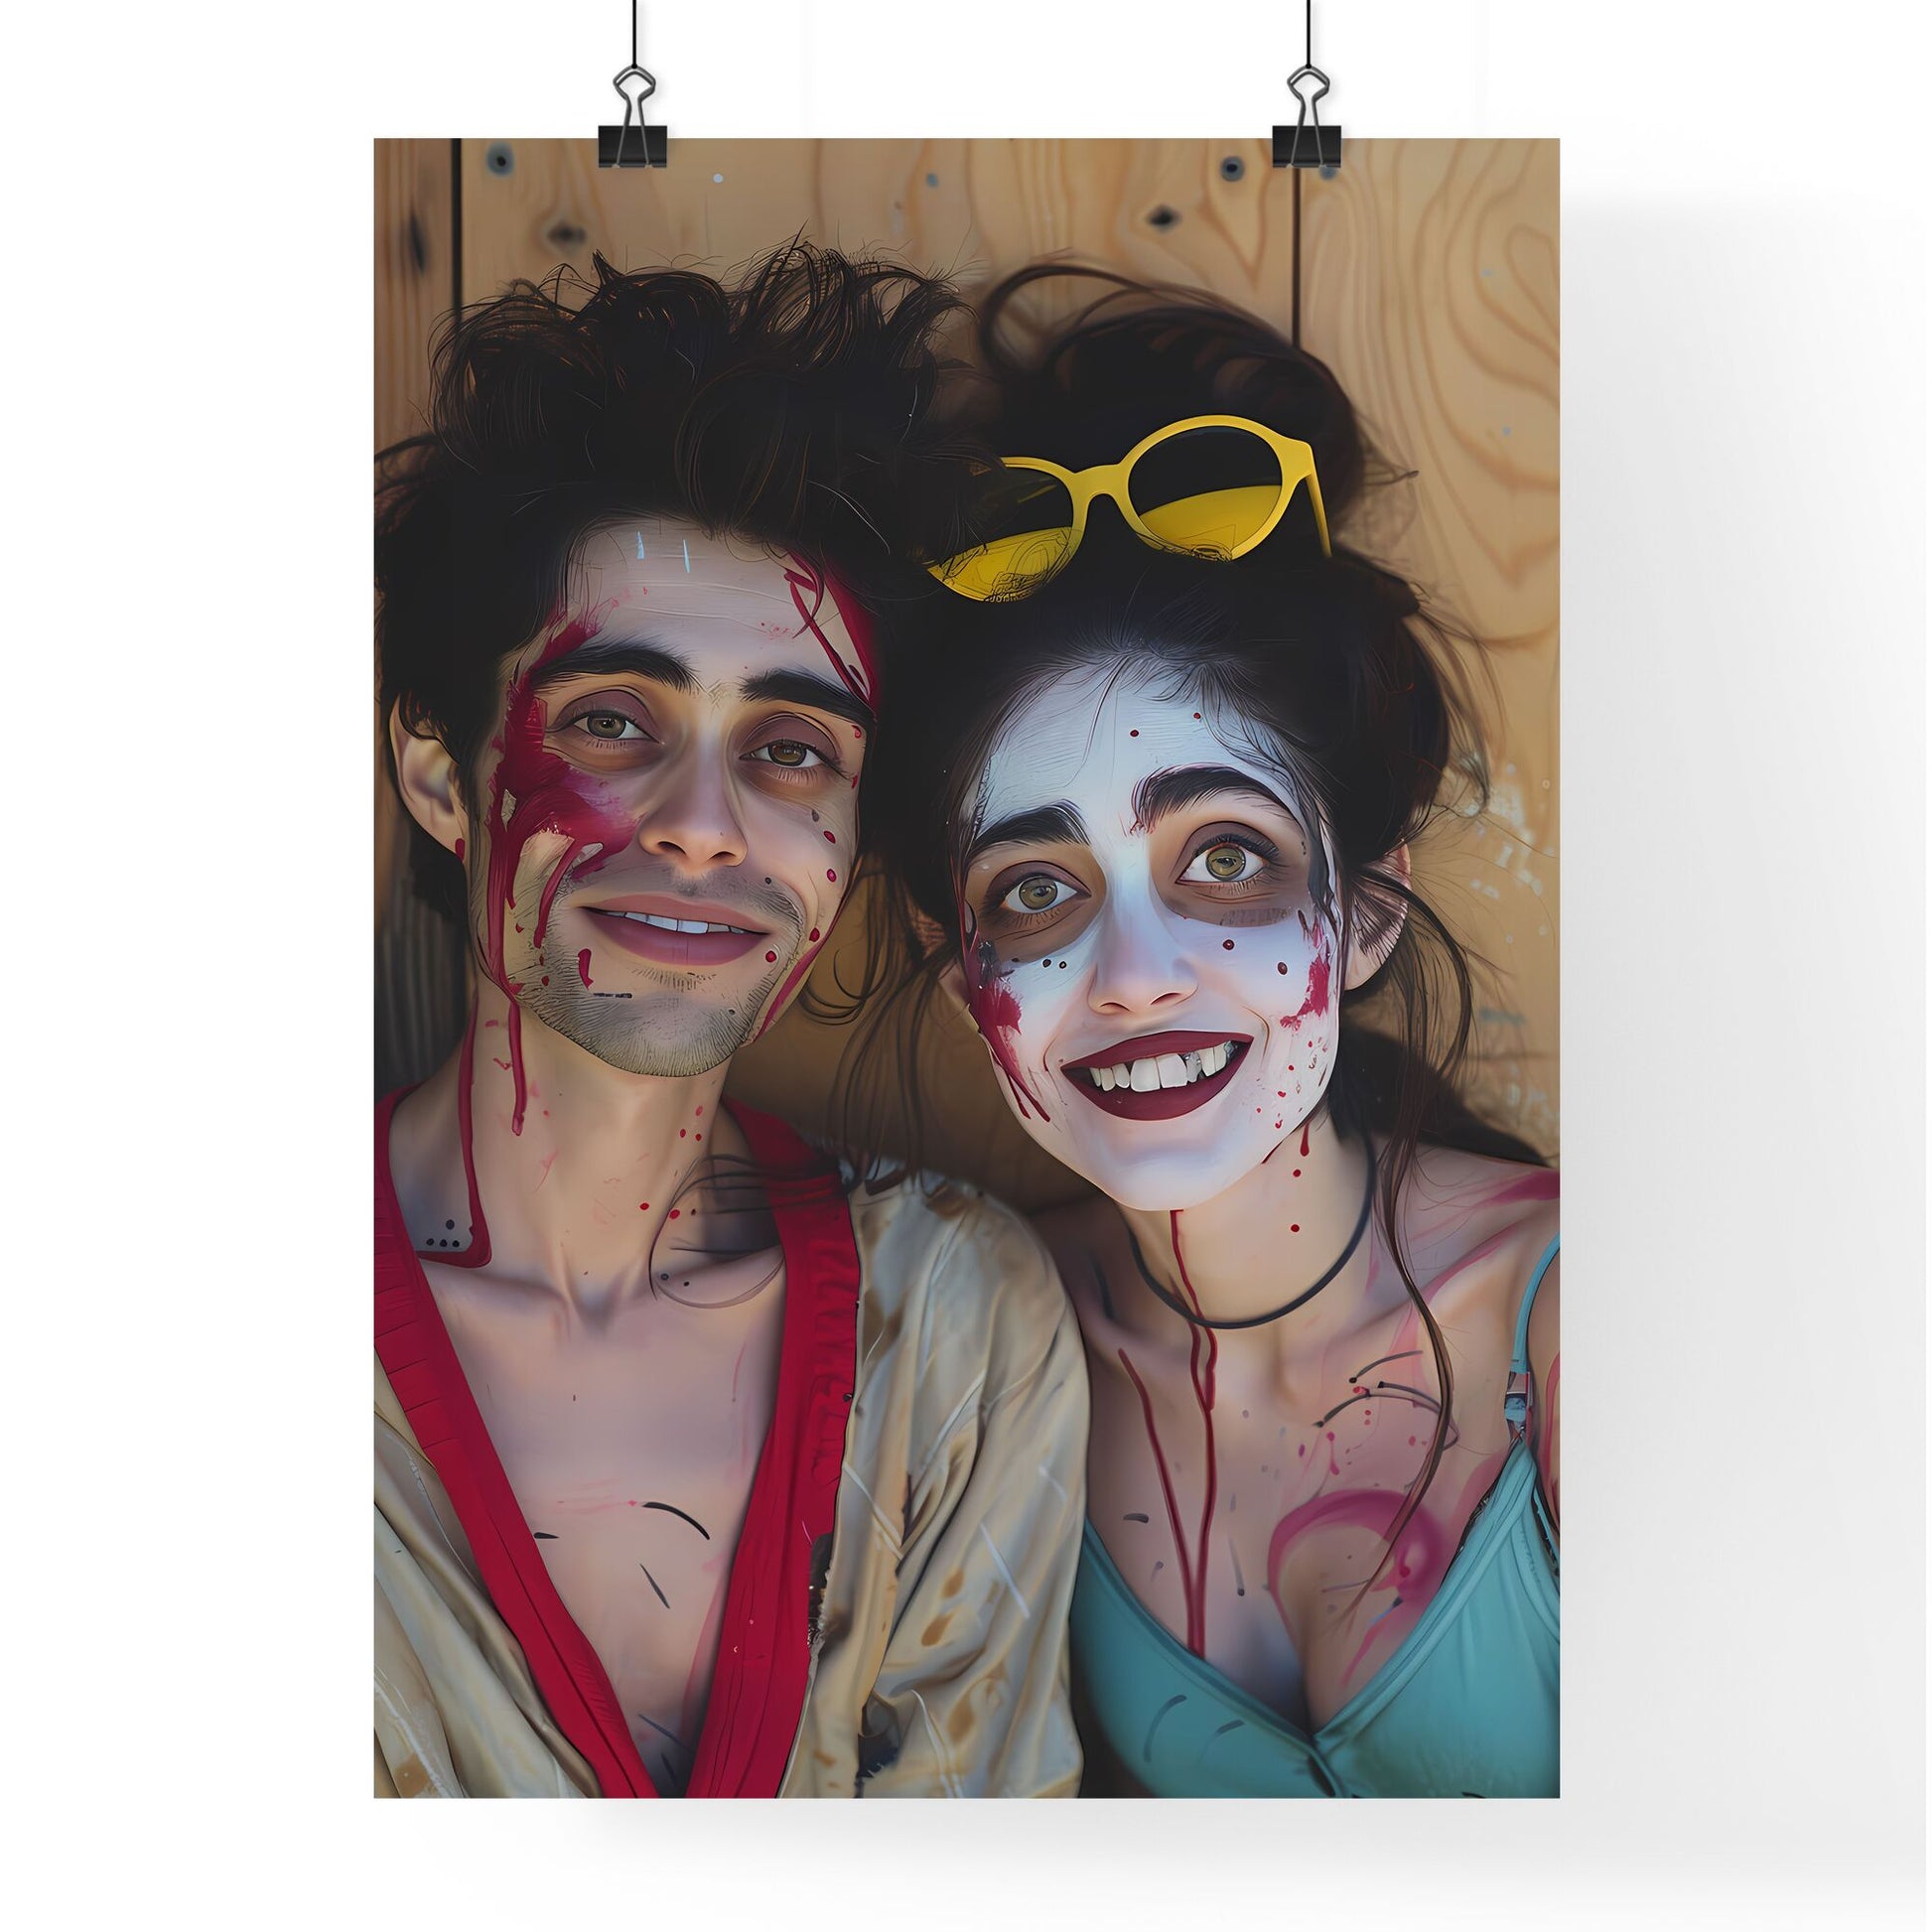 You are creating trigger phrases together to make it easier to access the fun personalities ;) #SchizoLove - a man and woman with paint on their faces Default Title